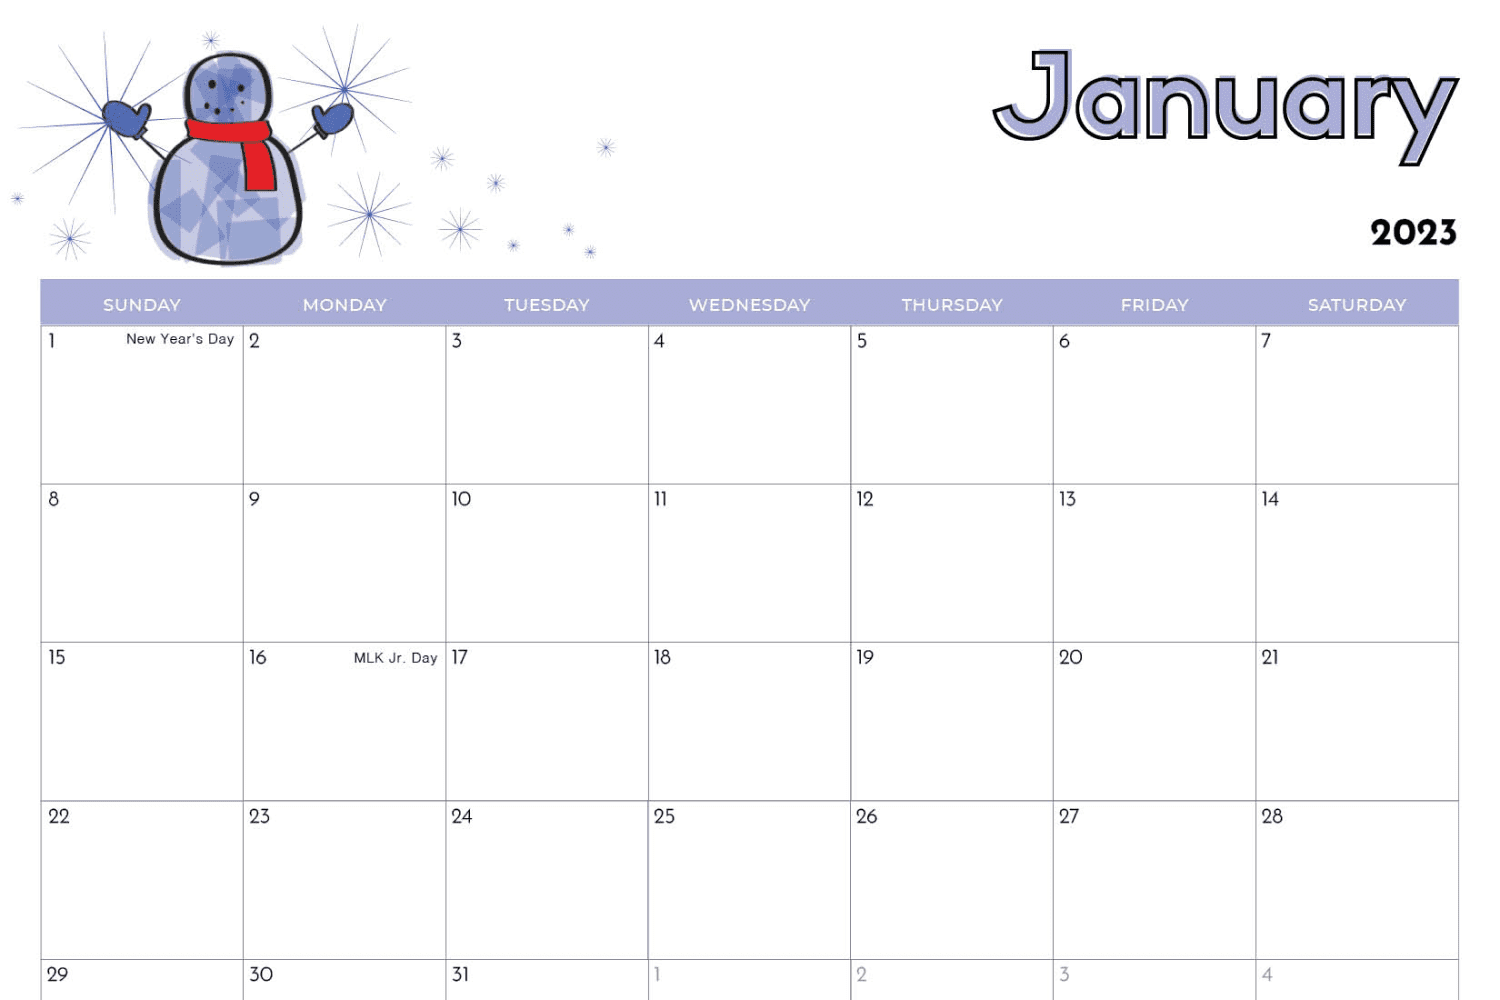 Calendar for January in a minimalist style with a drawn snowman.